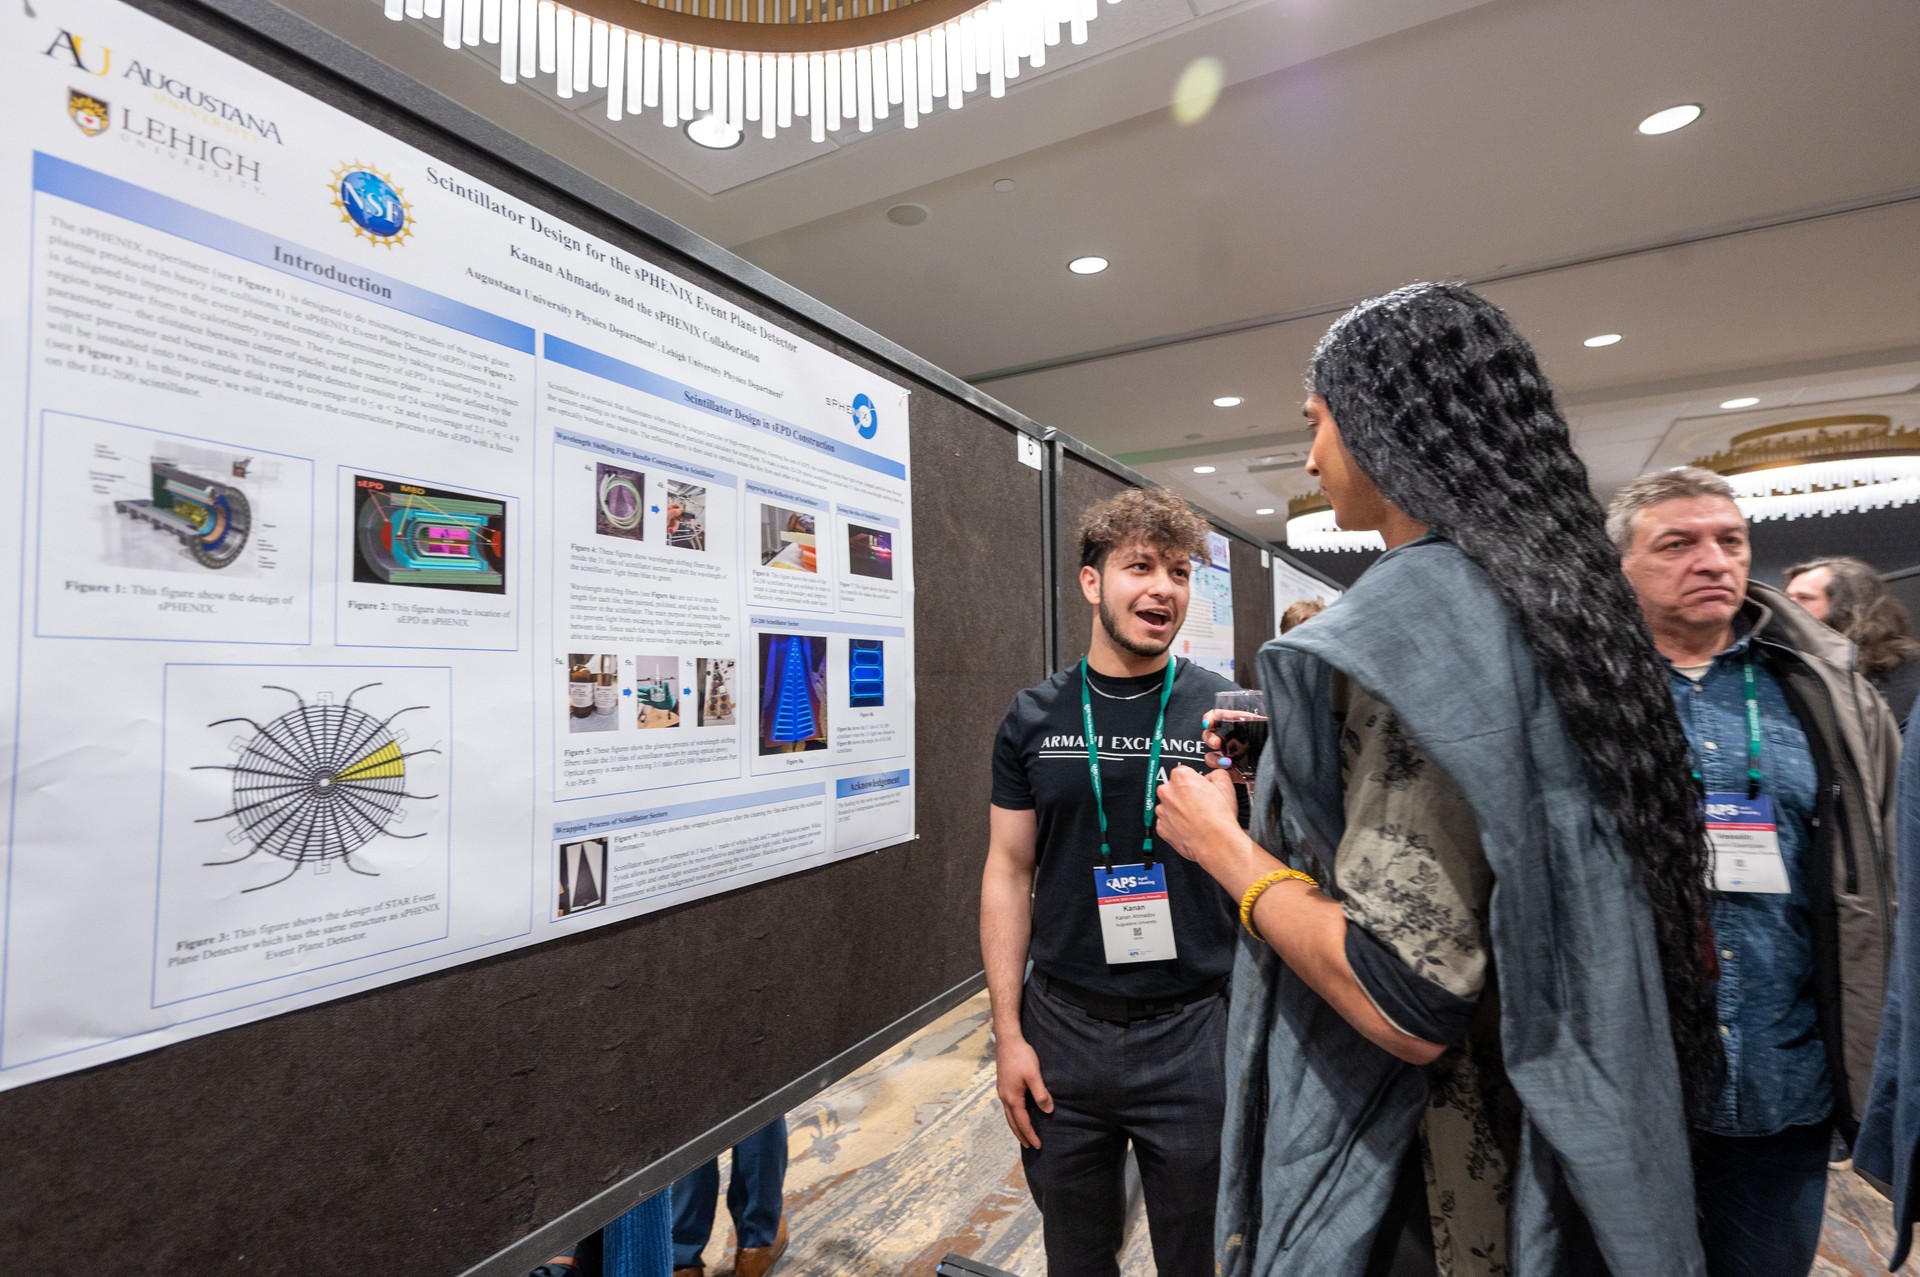 A student presenting a poster